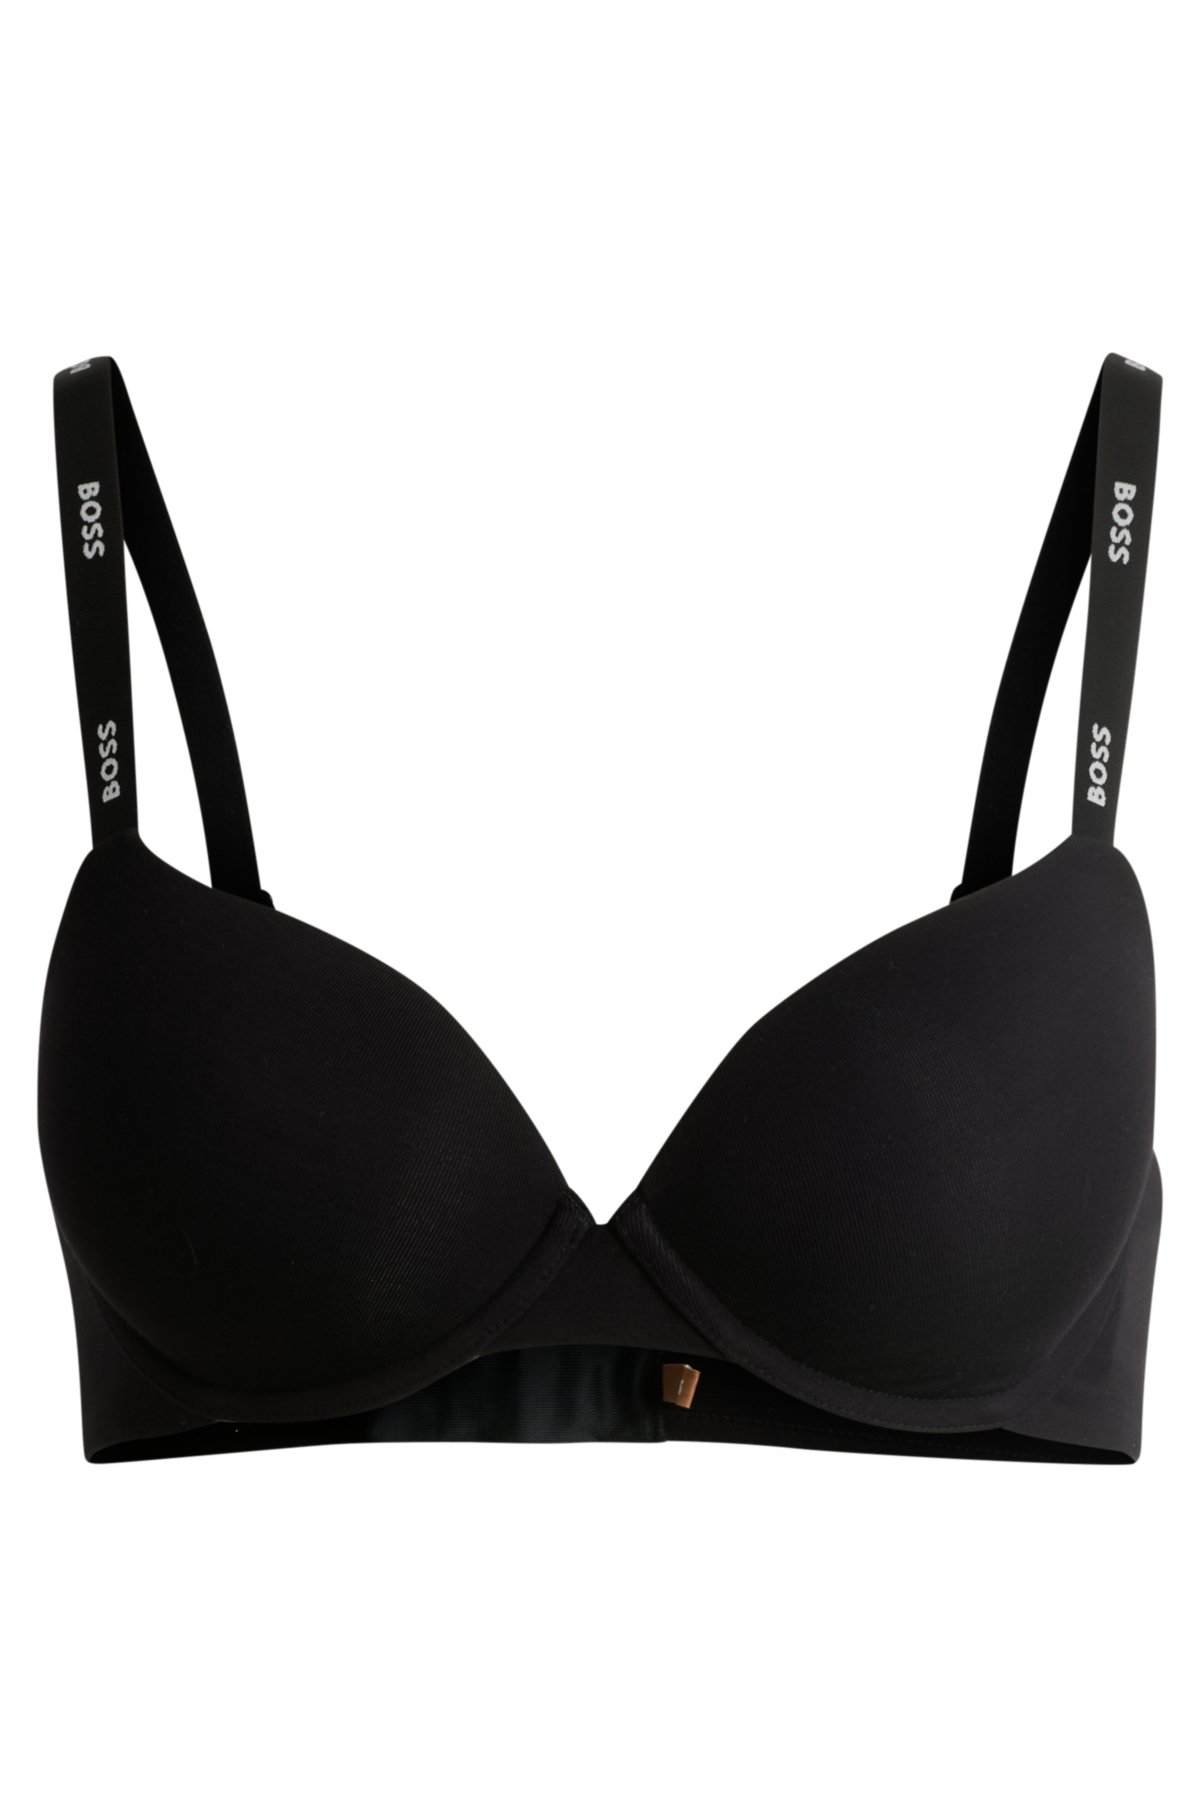 Victoria's Secret - Off-duty, yet on trend—our banded cut-out bra